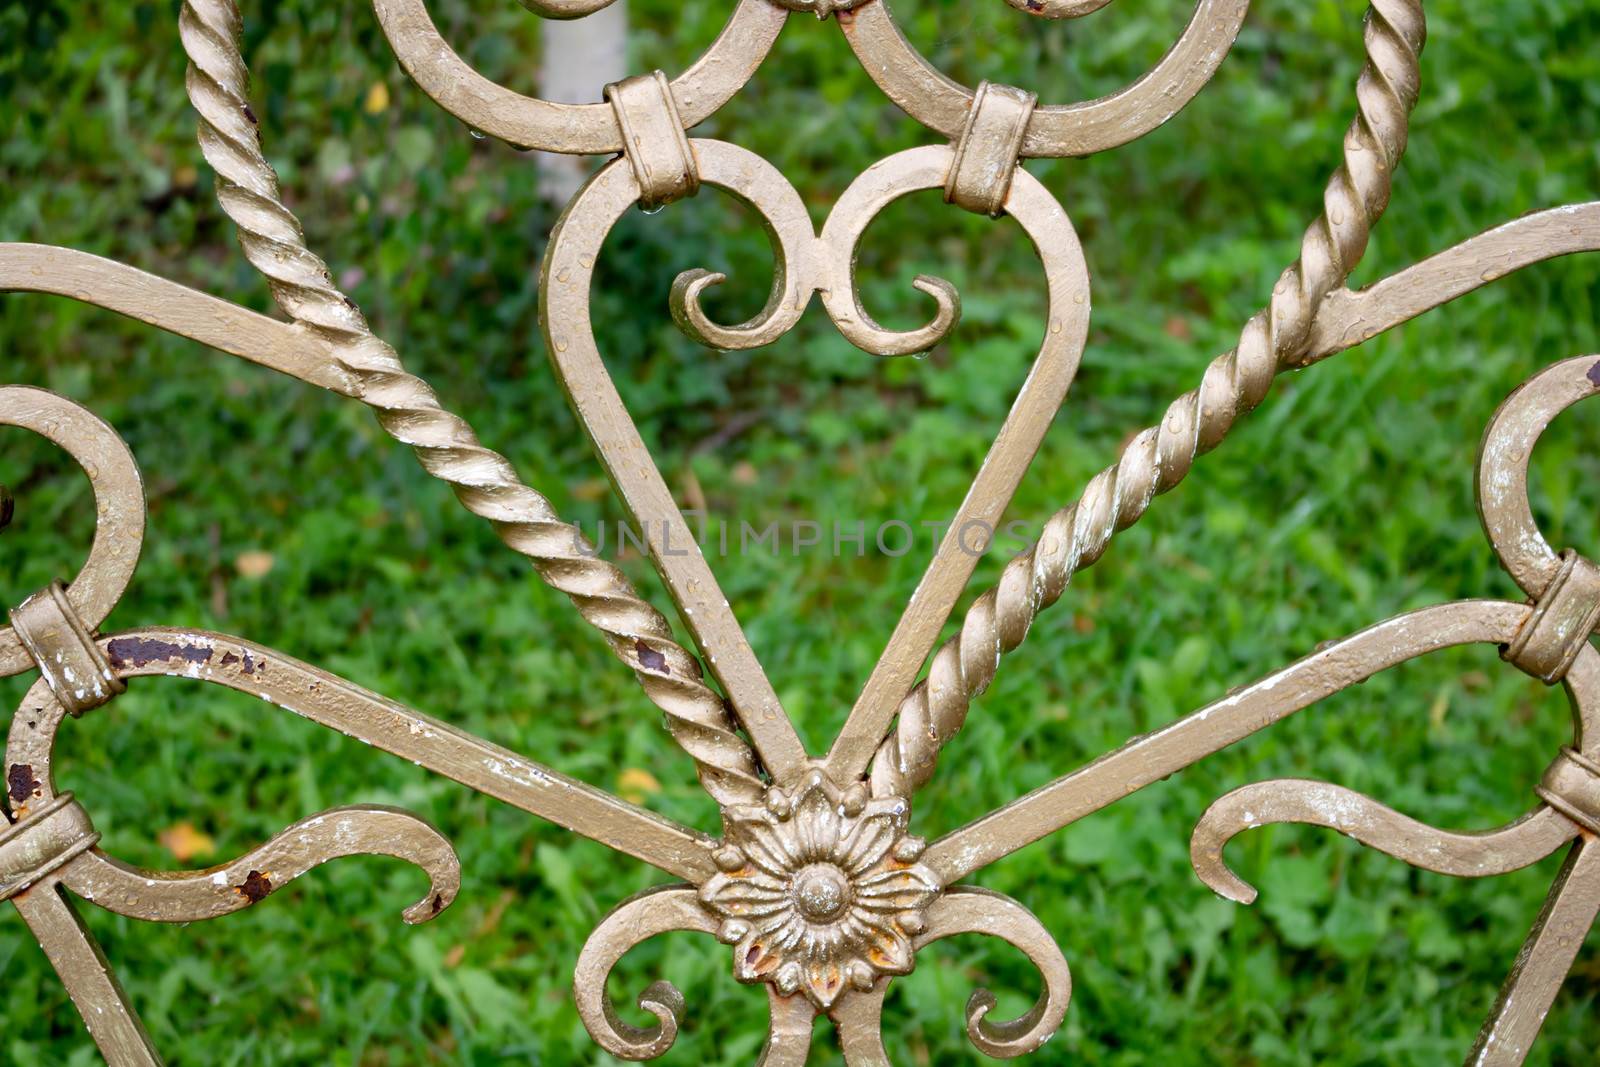 Forged elements on a garden bench in the shape of a heart.Garden wrought iron furniture in the garden by lapushka62